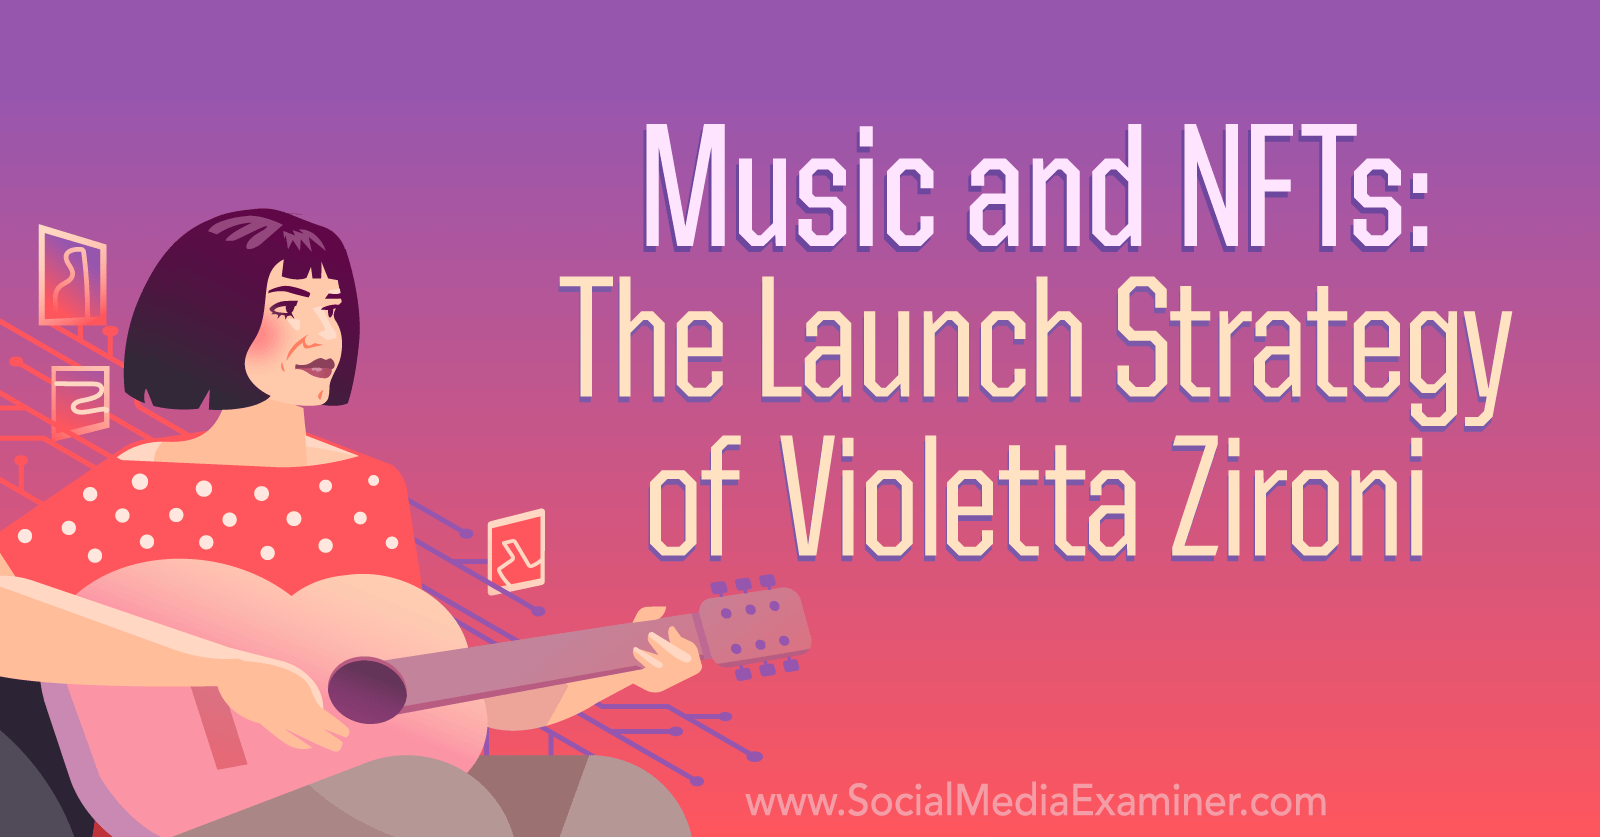 Music and NFTs: The Launch Strategy of Violetta Zironi by Social Media Examiner